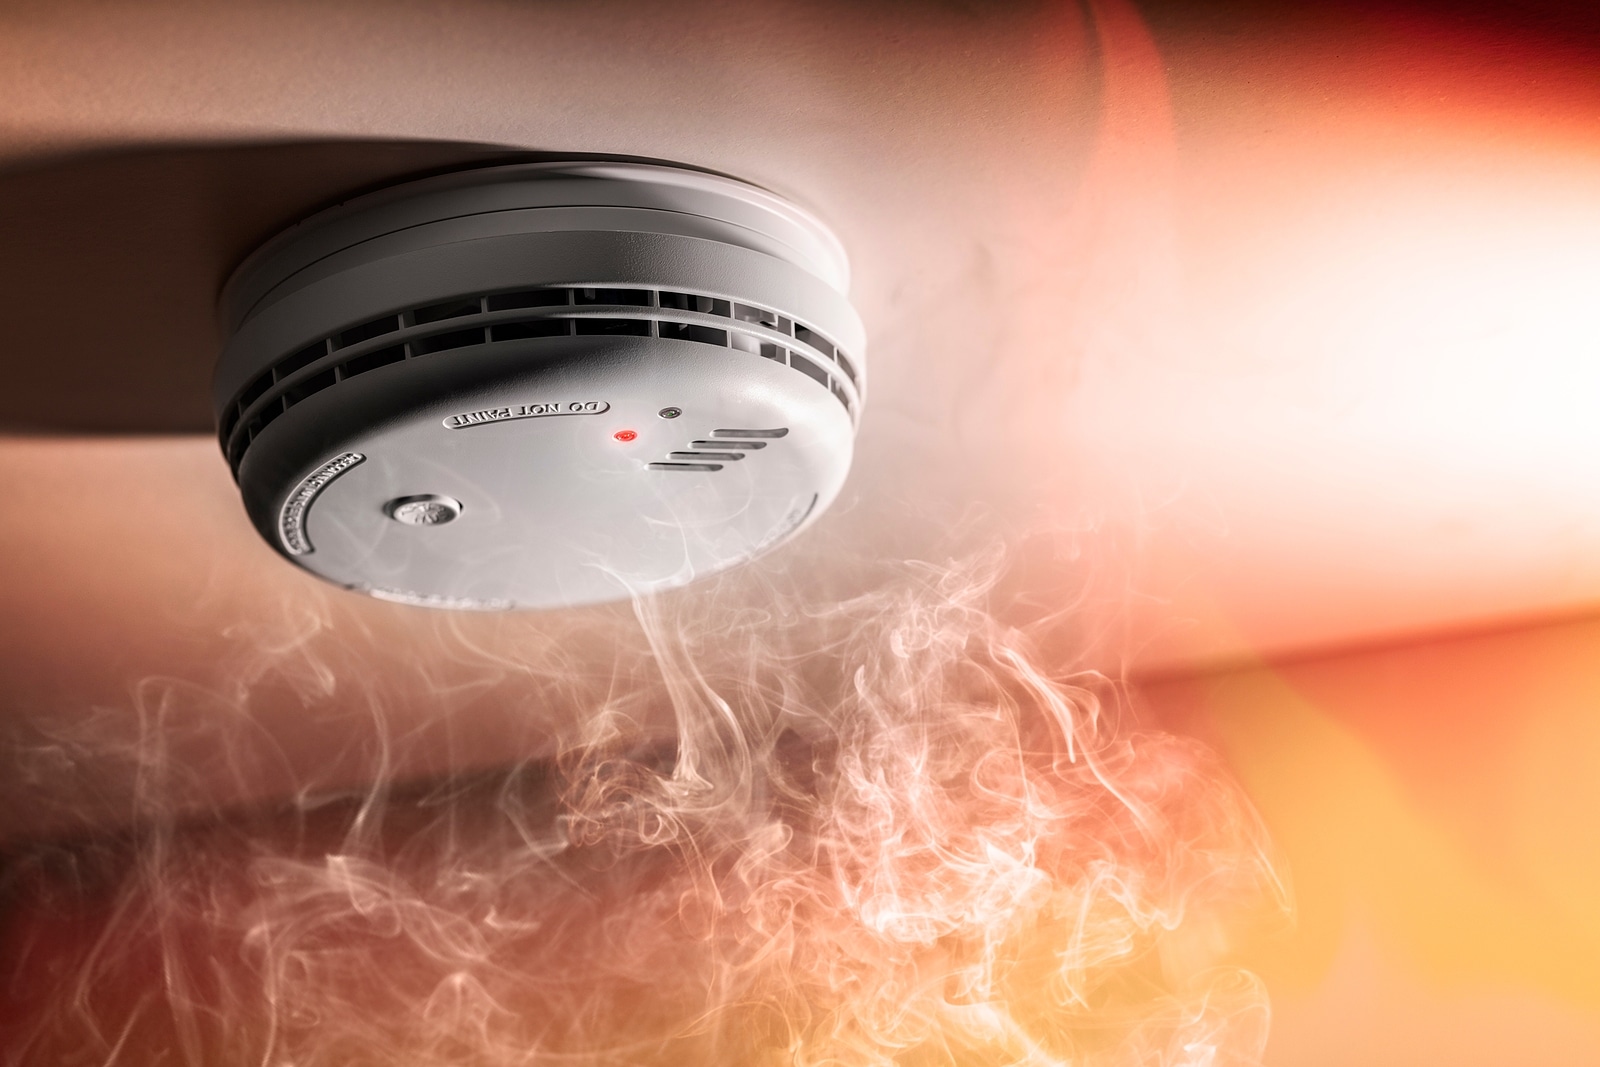 Smoke detector and interlinked fire alarm in action background w